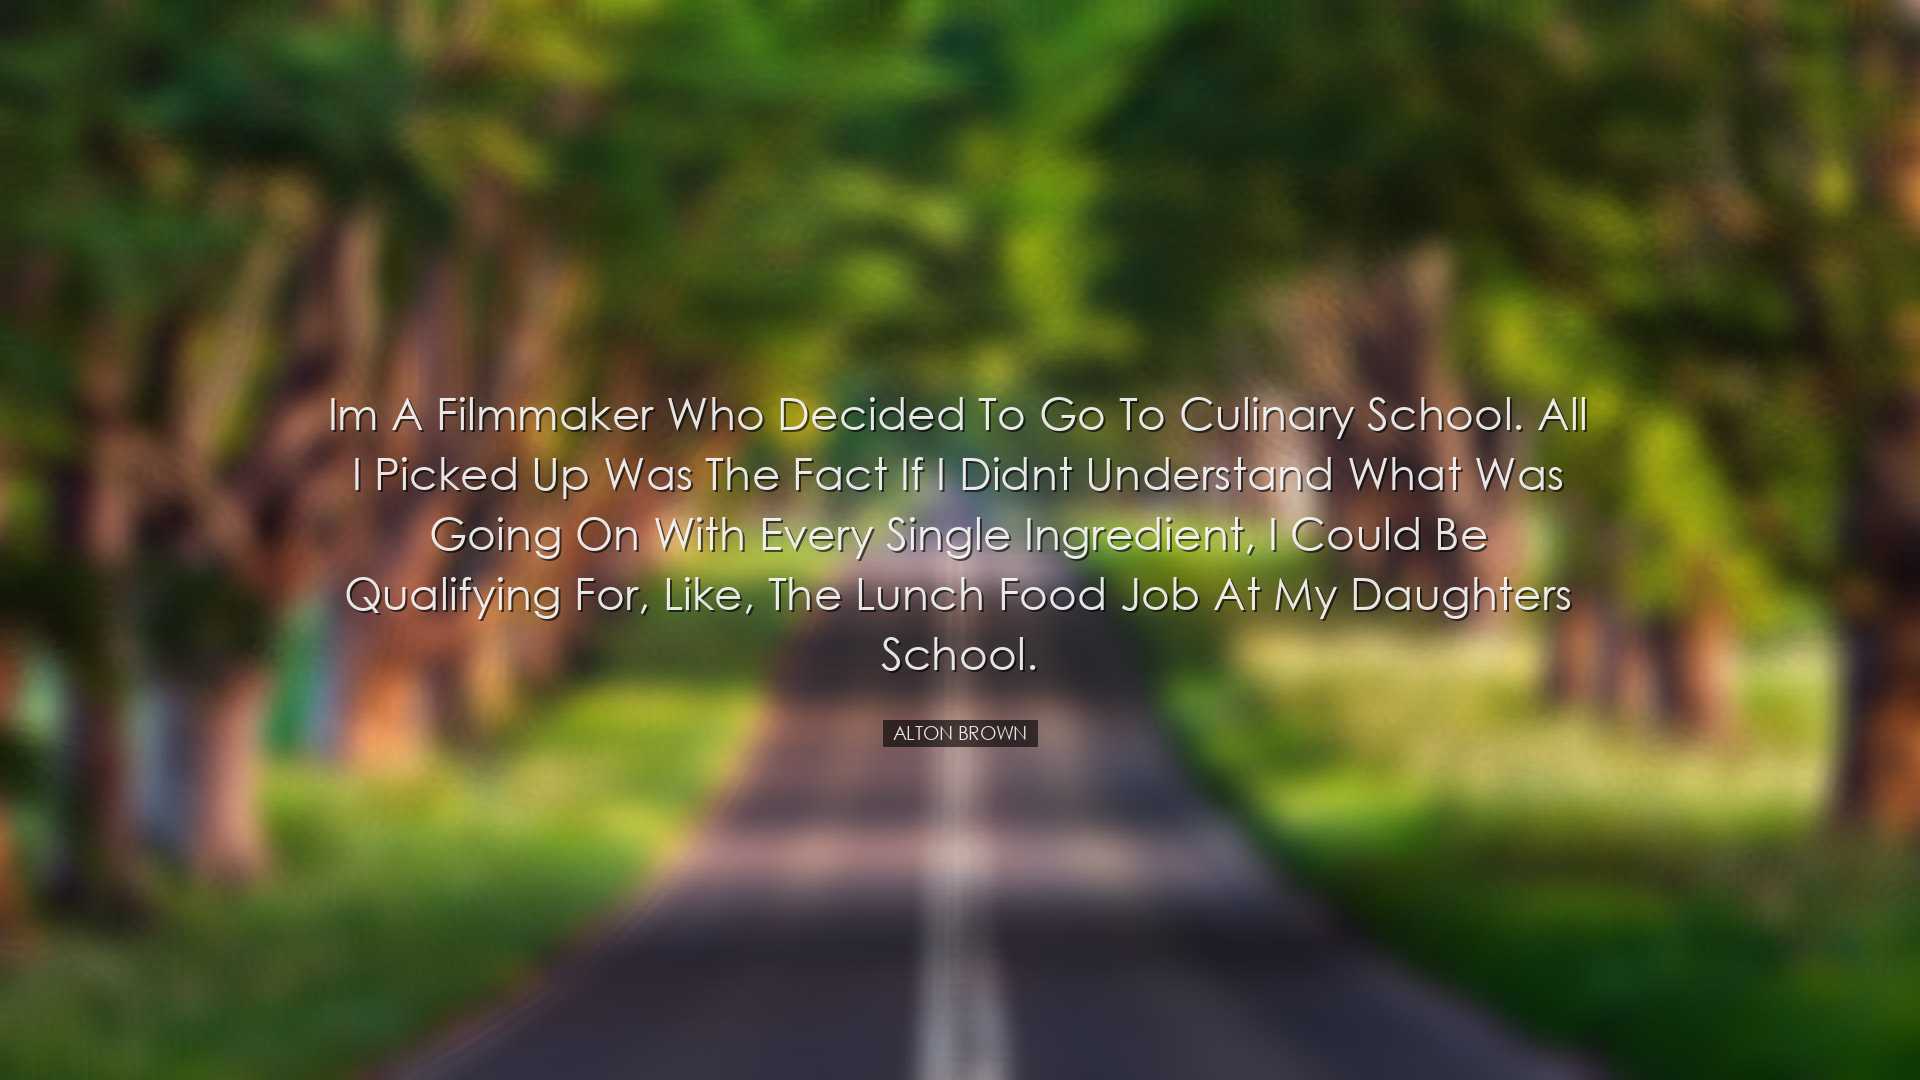 Im a filmmaker who decided to go to culinary school. All I picked